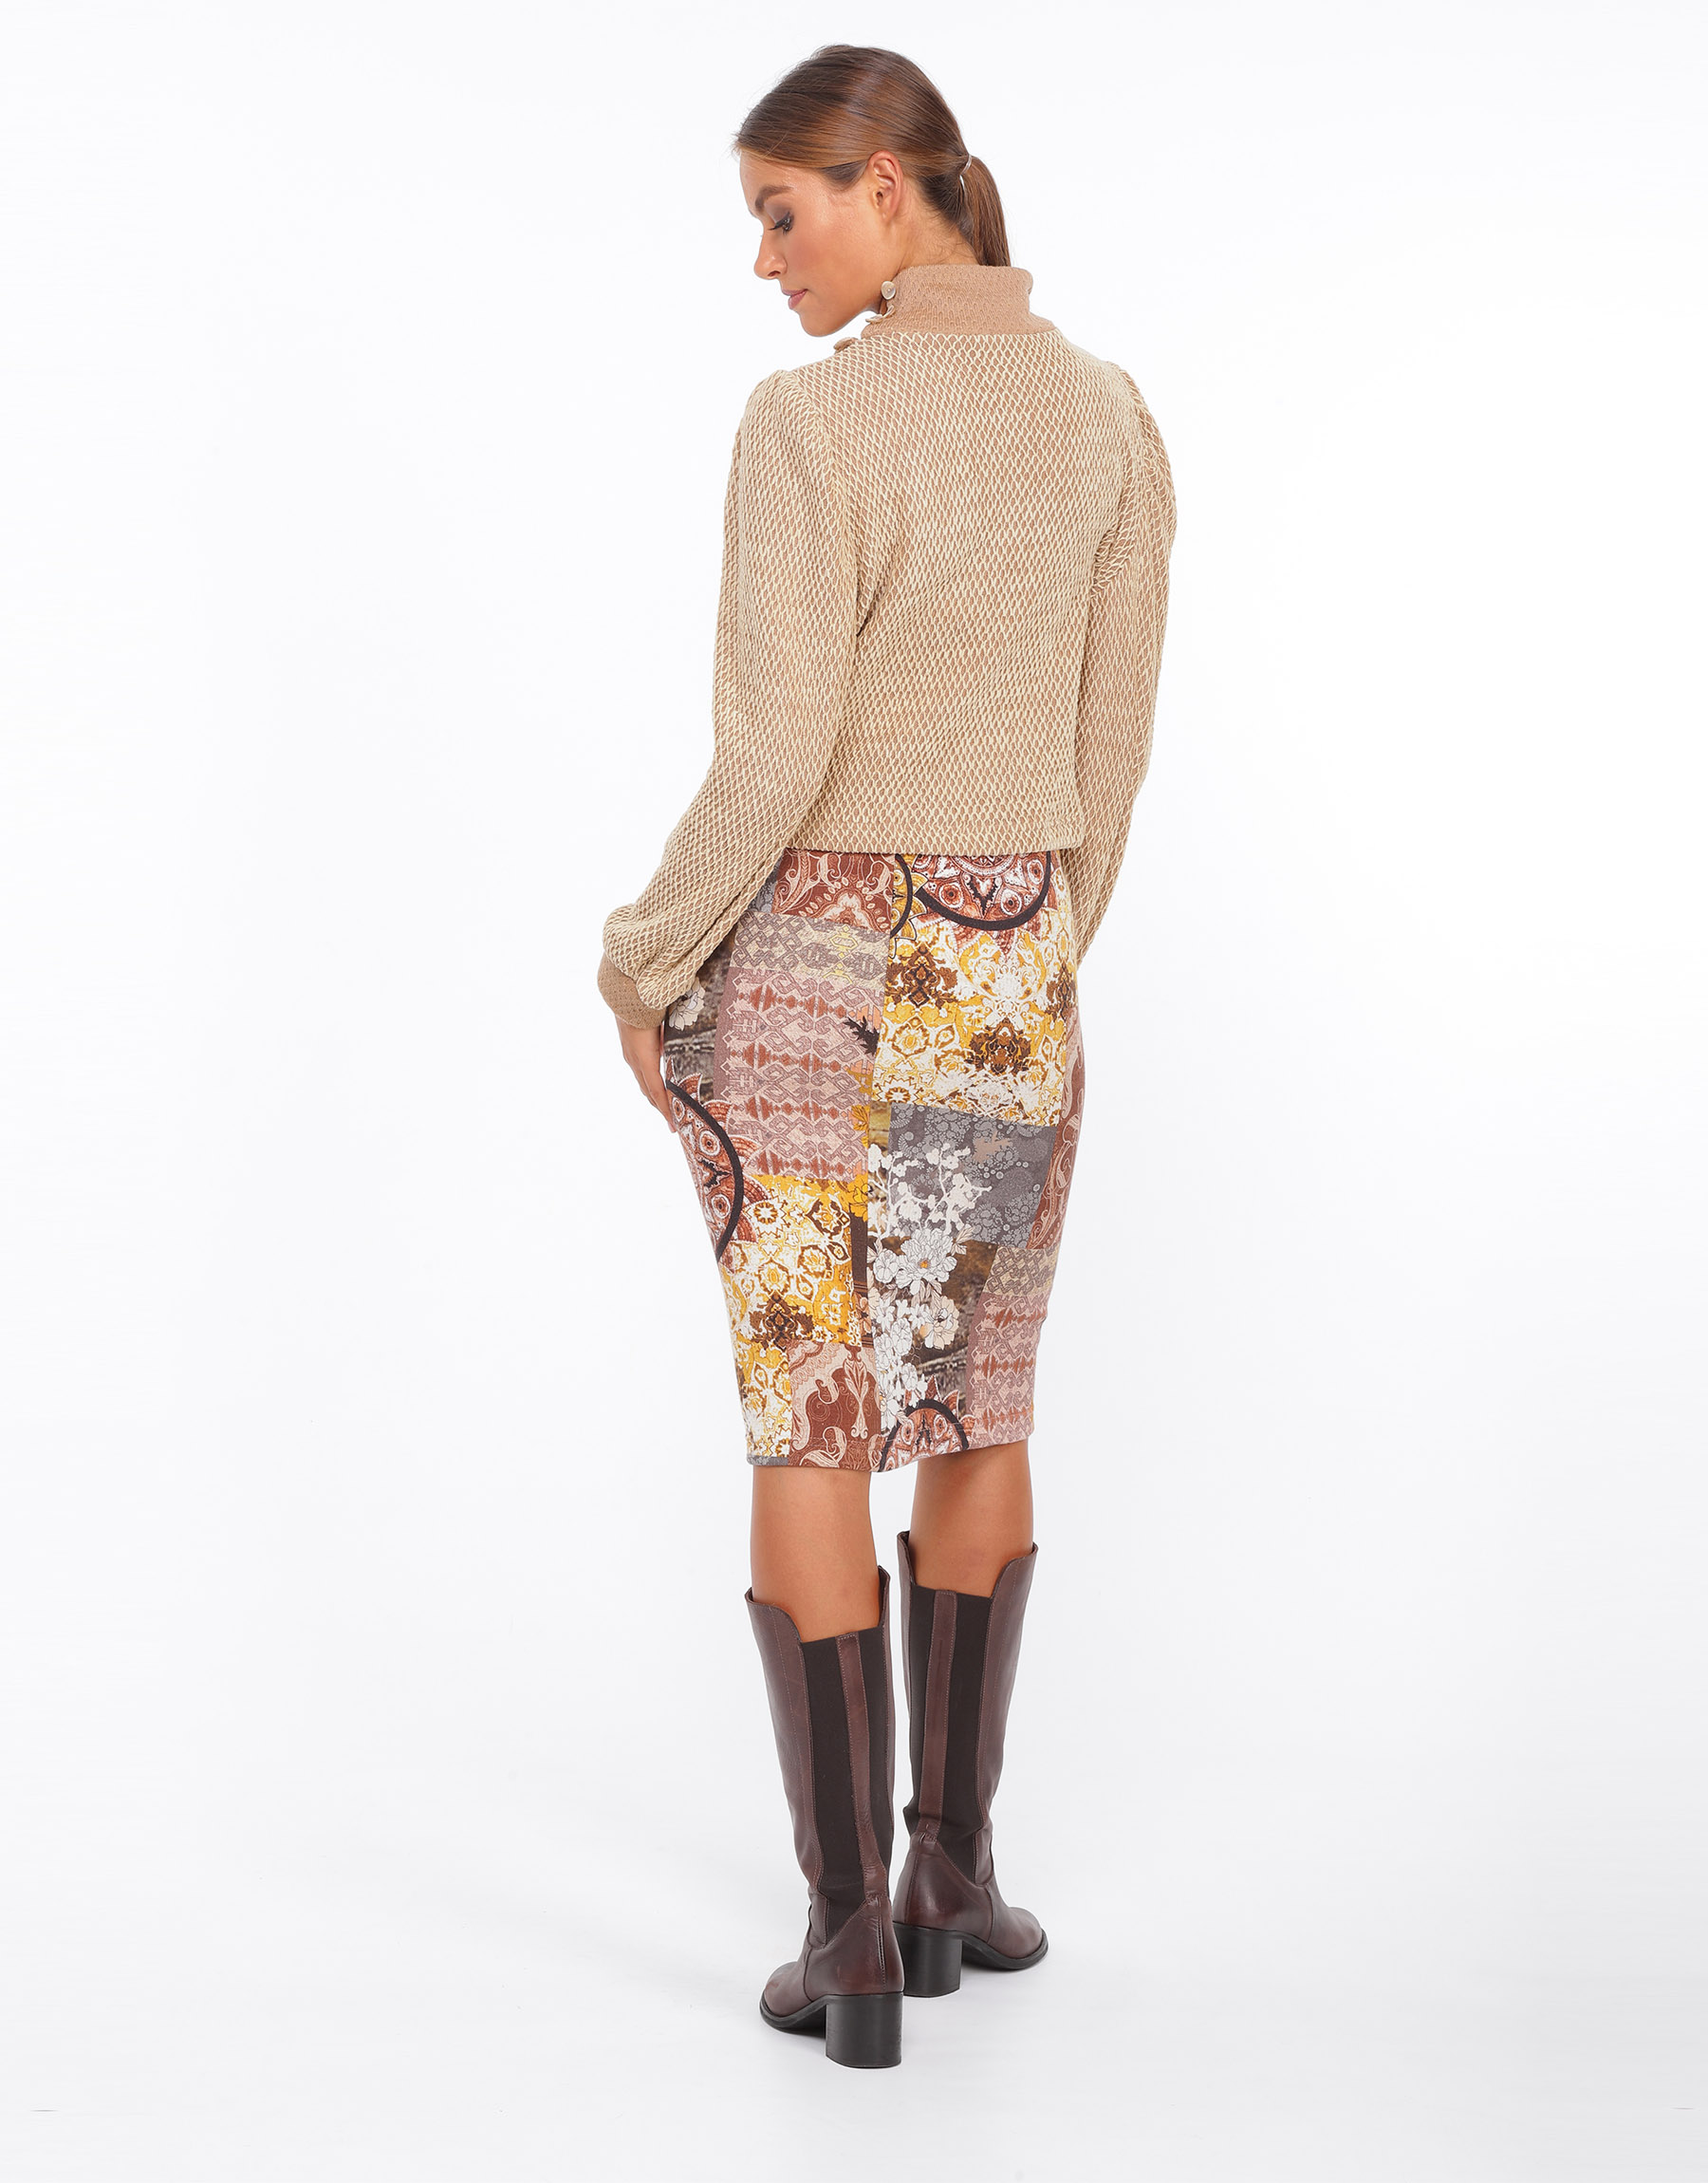 High-waisted pencil skirt in patchwork printed jersey